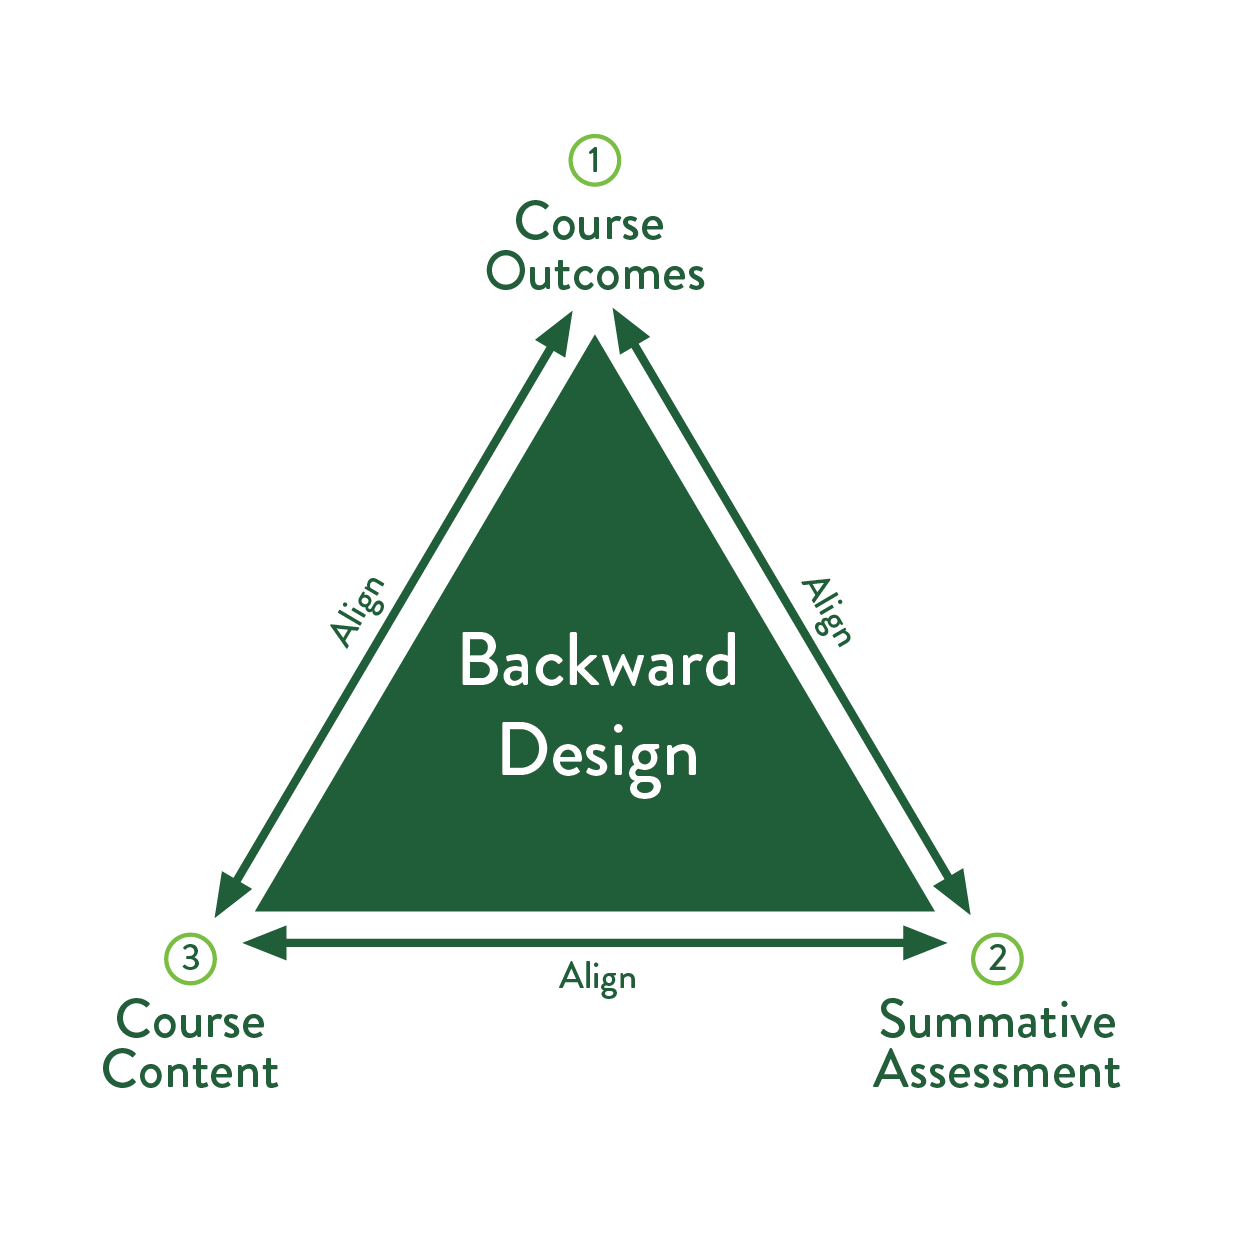 Backwards Design Triangle. Shows that Course Outcomes, Summative Assessment, and Course Content all align.